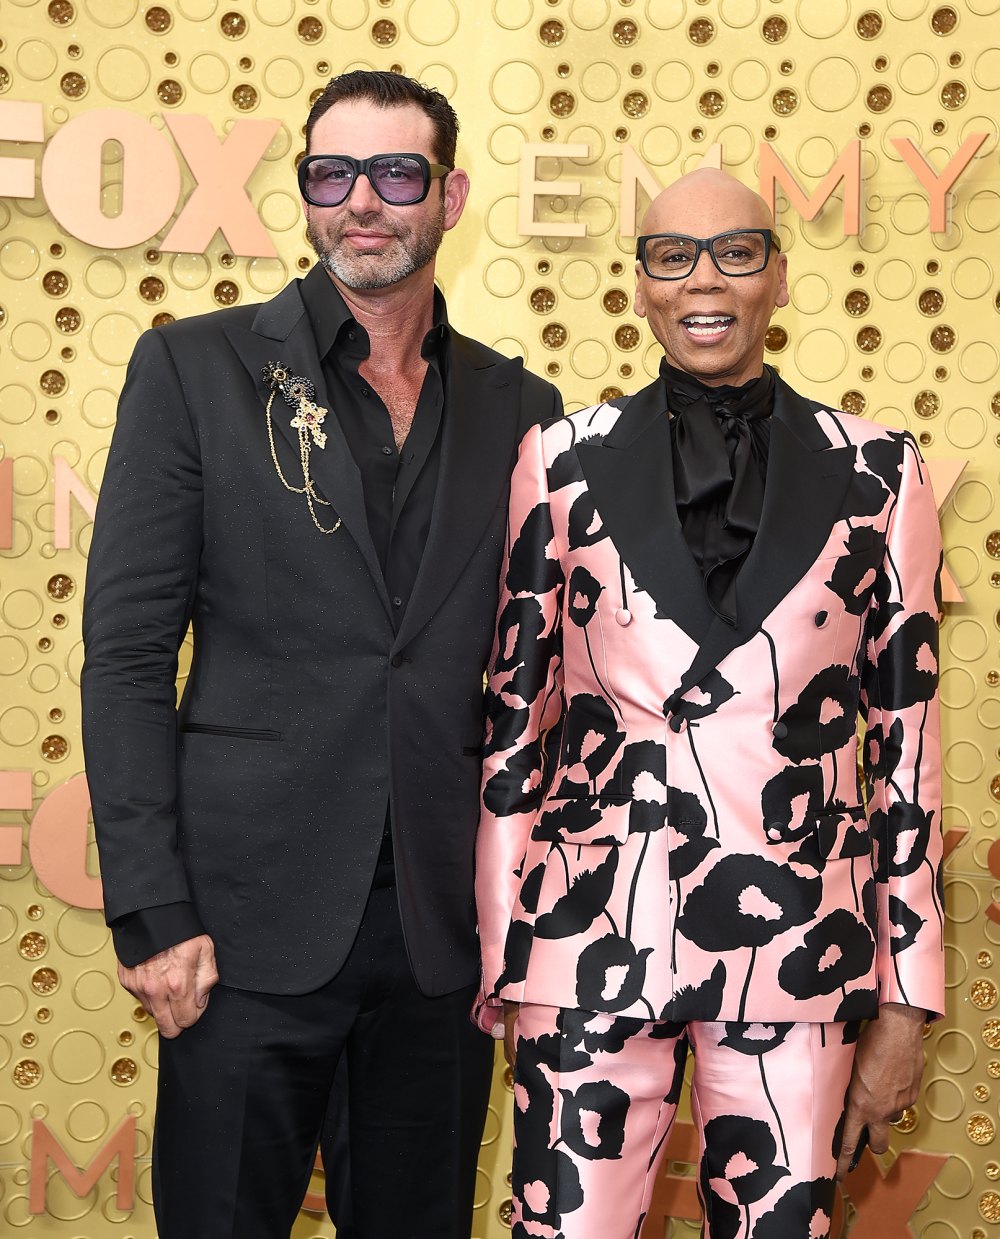 RuPaul Says Husband Georges LeBar Introduced Him to ‘Intimacy’ When Asking to ‘Floss’ His Teeth